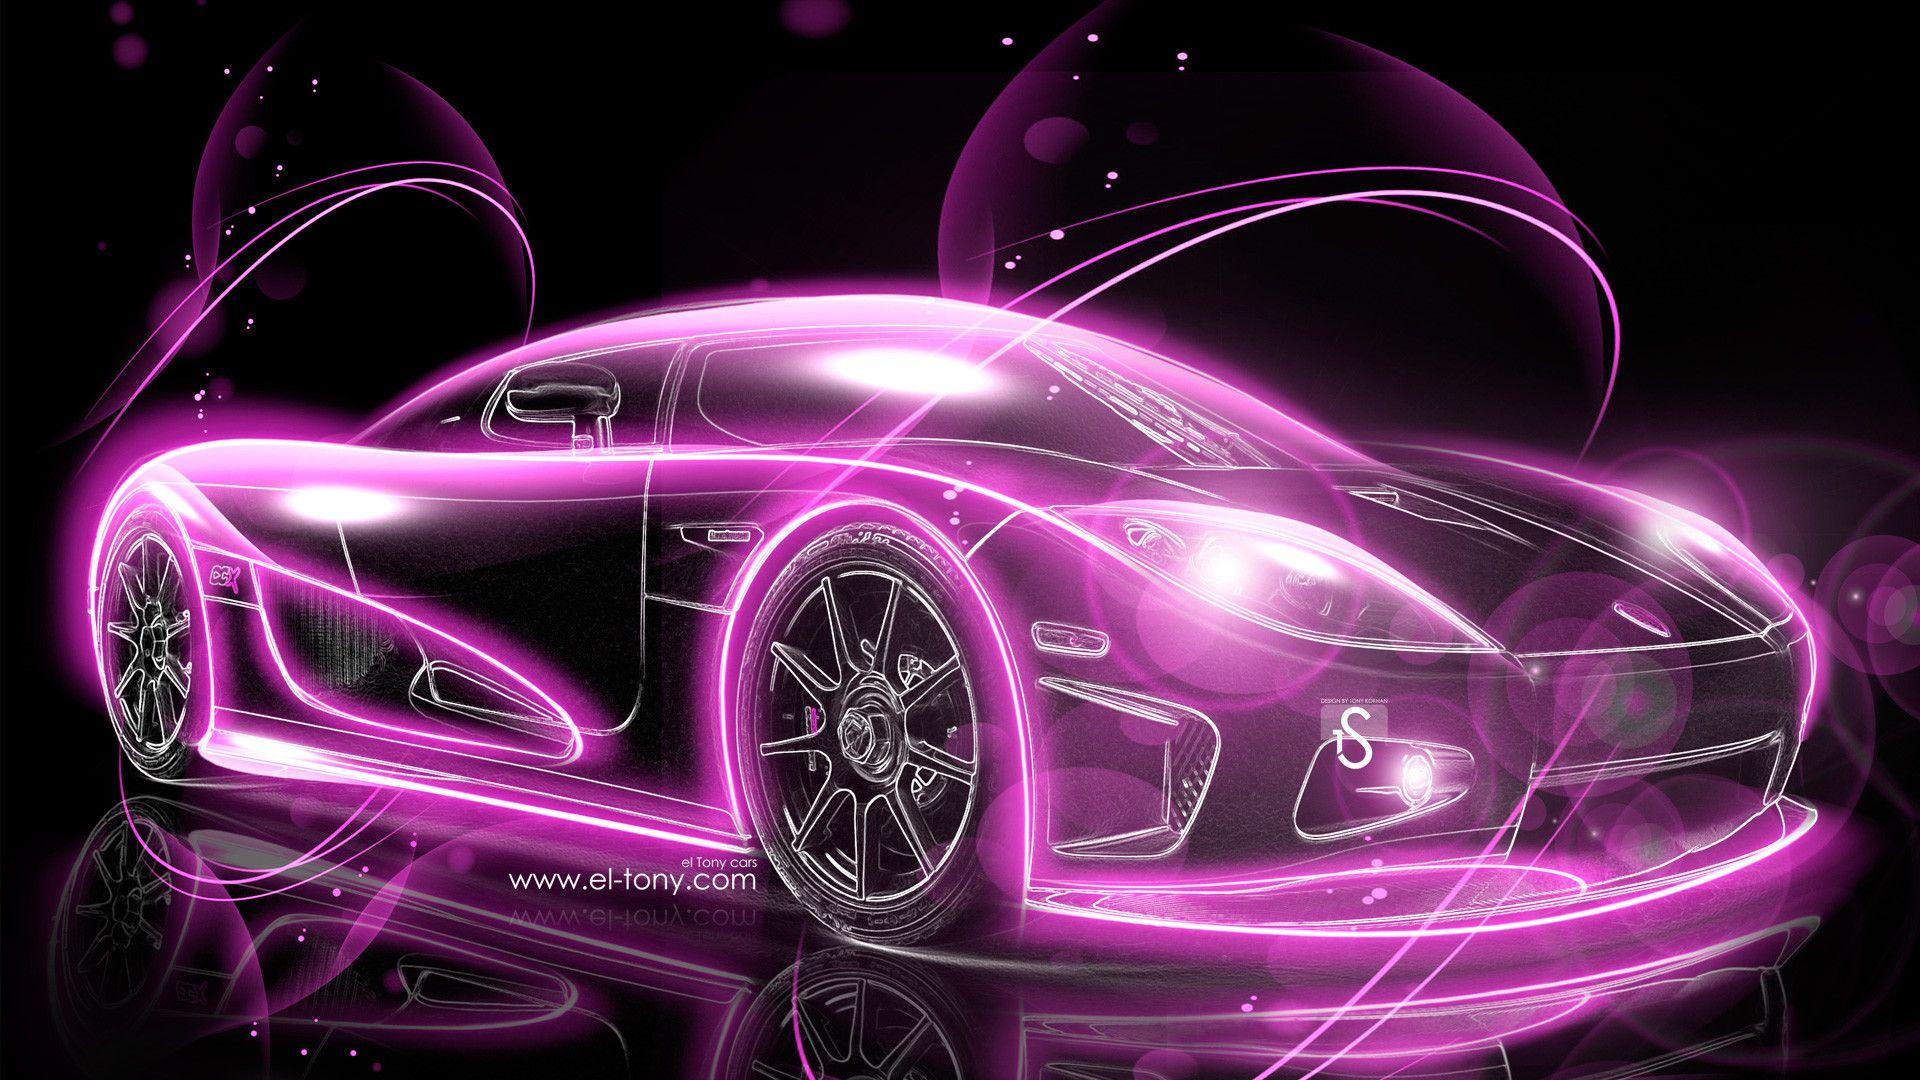 great pink car picture. Fast cars. Car